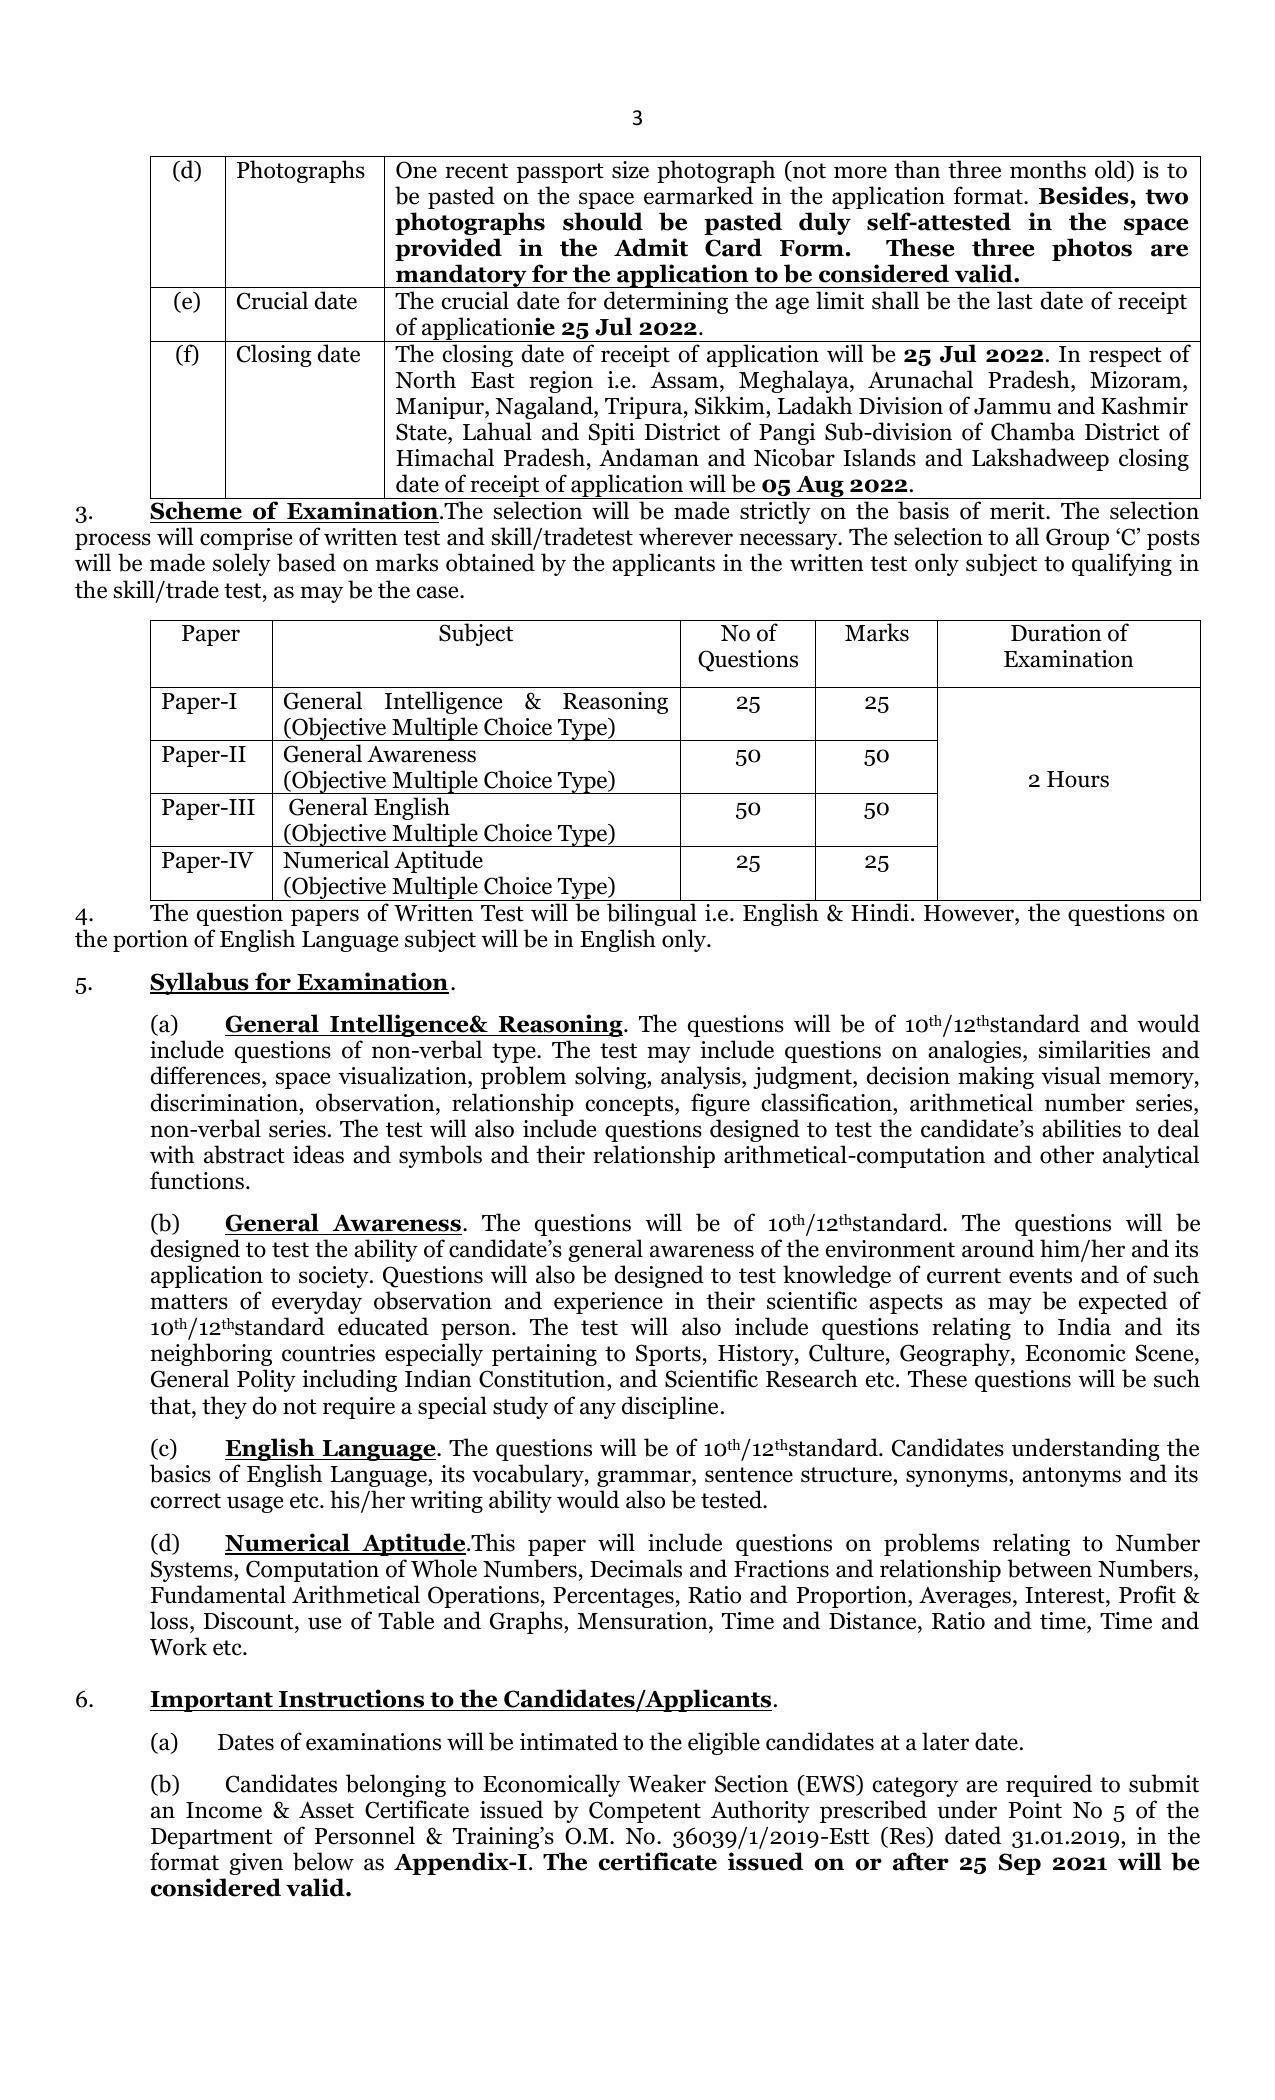 HQ Infantry School MHOW Invites Application for 101 Lower Division Clerk, Stenographer and Various POsts - Page 3